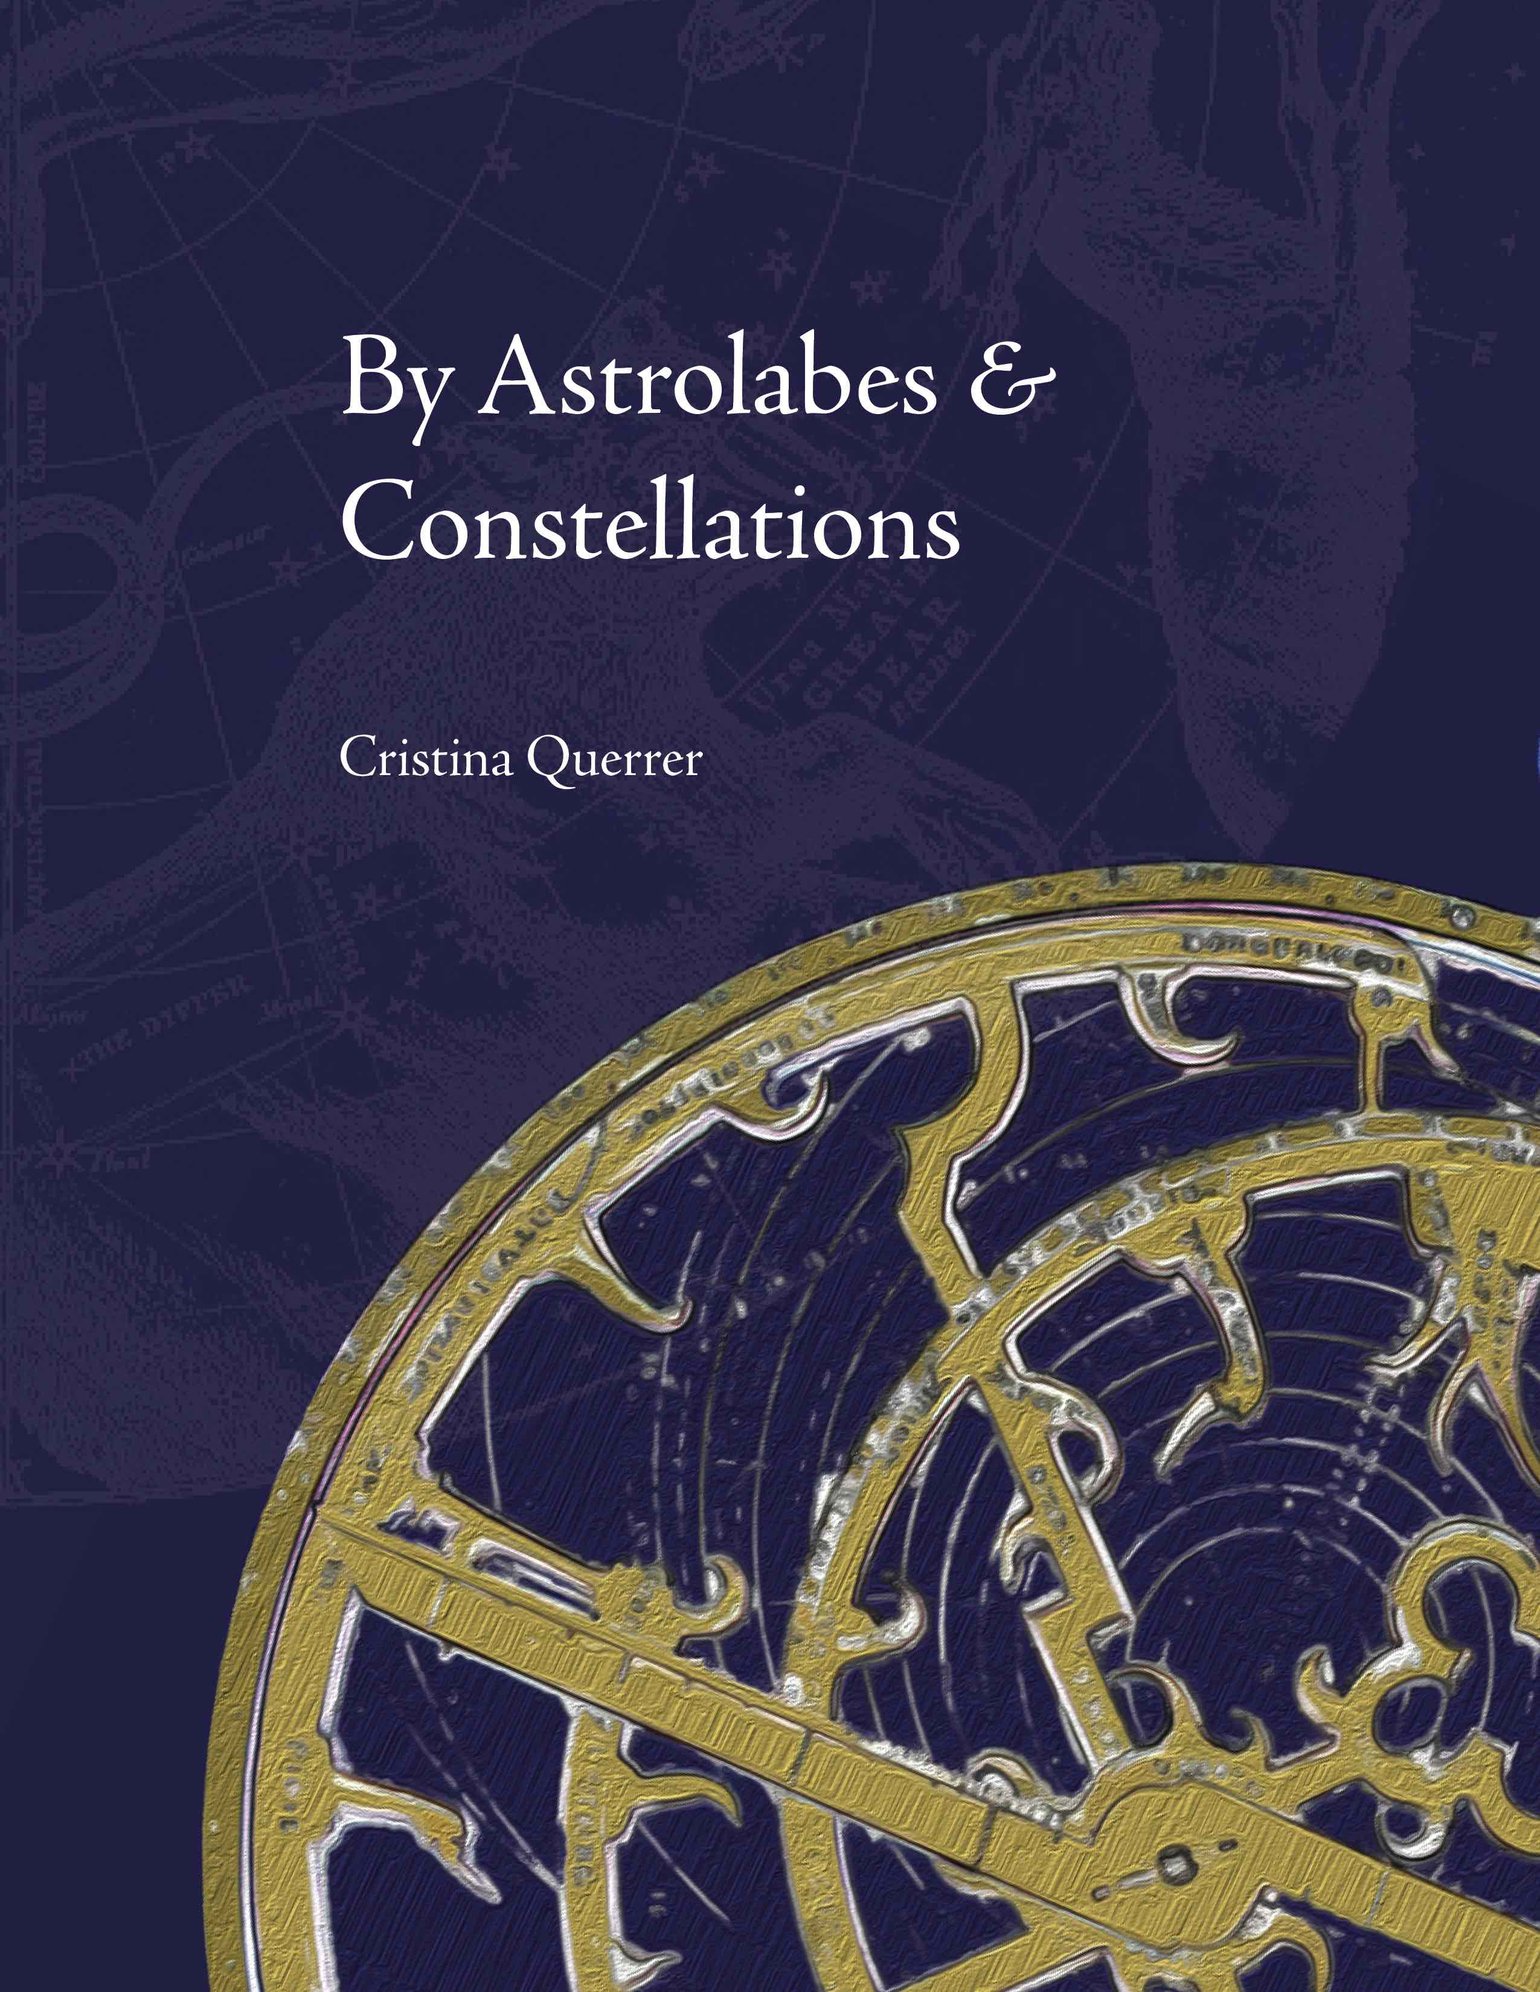 Image of By Astrolabes & Constellations